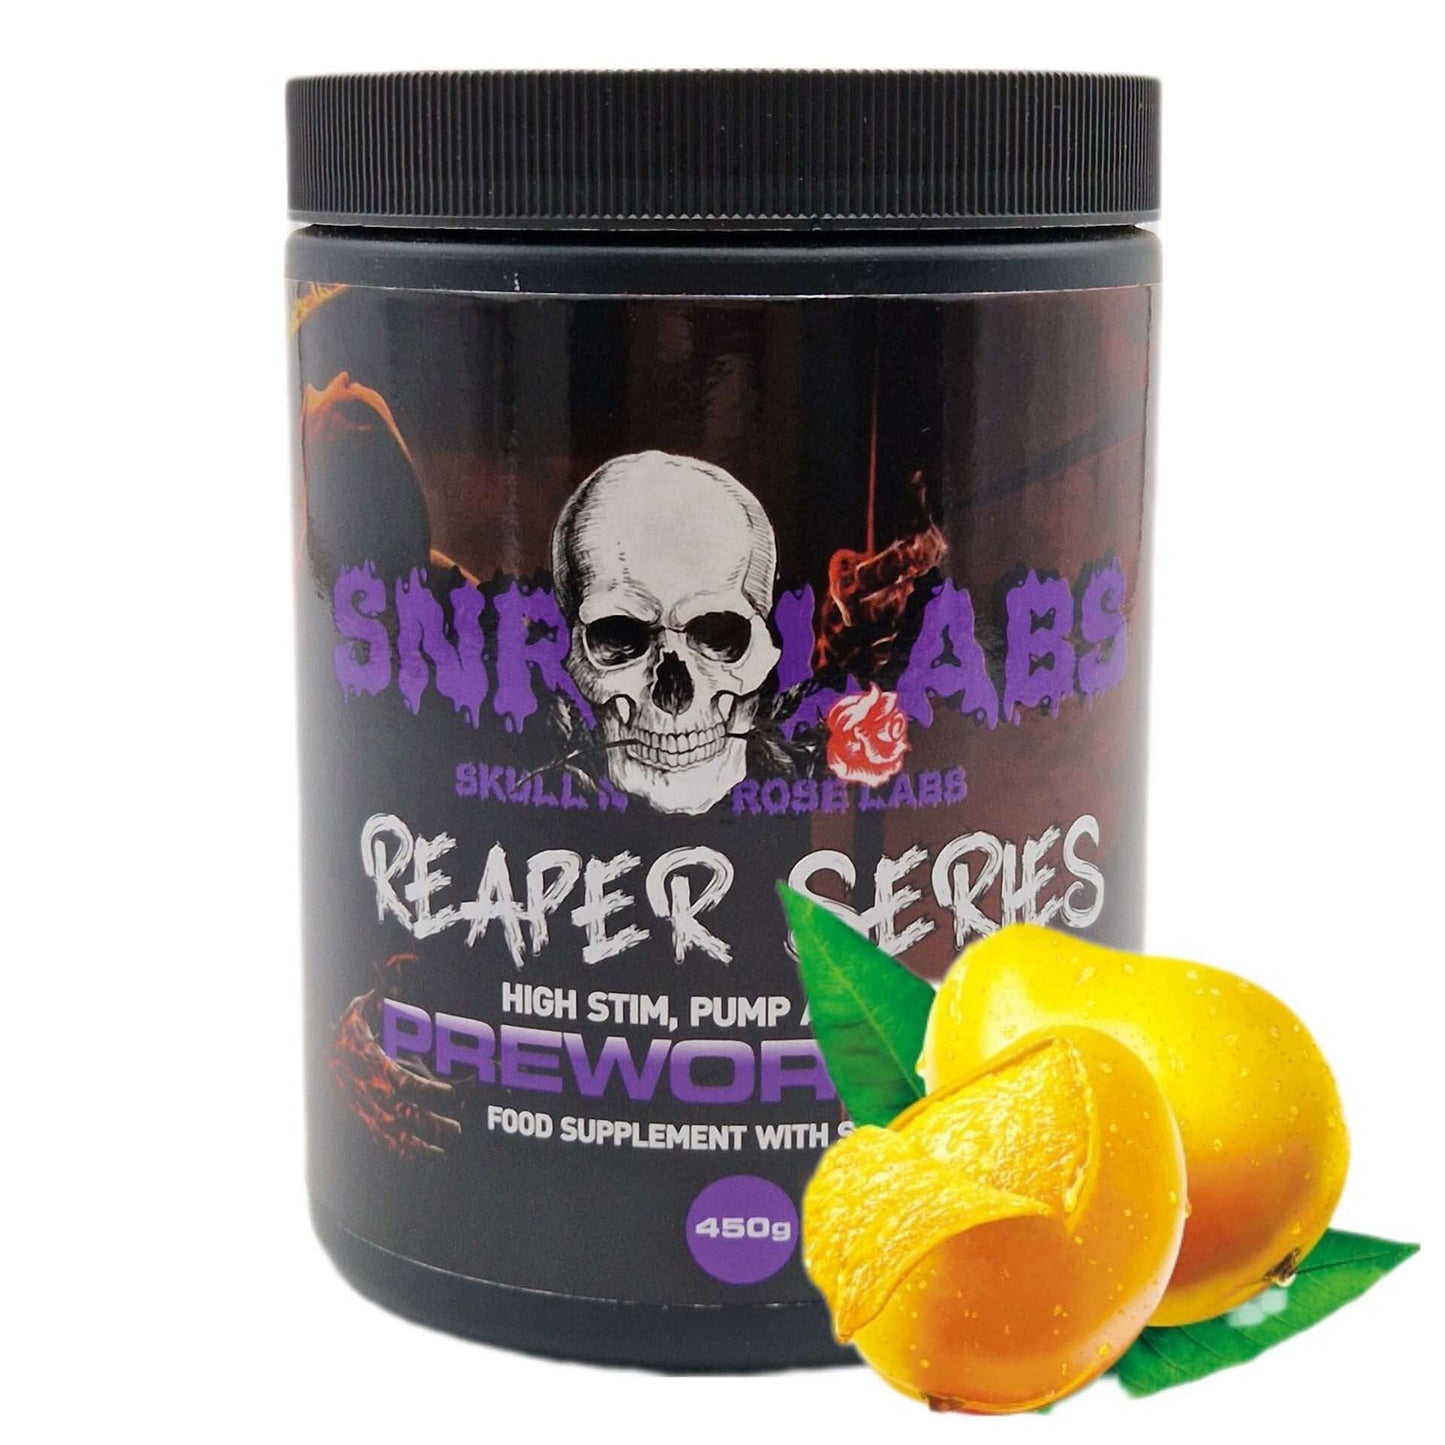 SNRLabs Reaper Series Pre Work Out